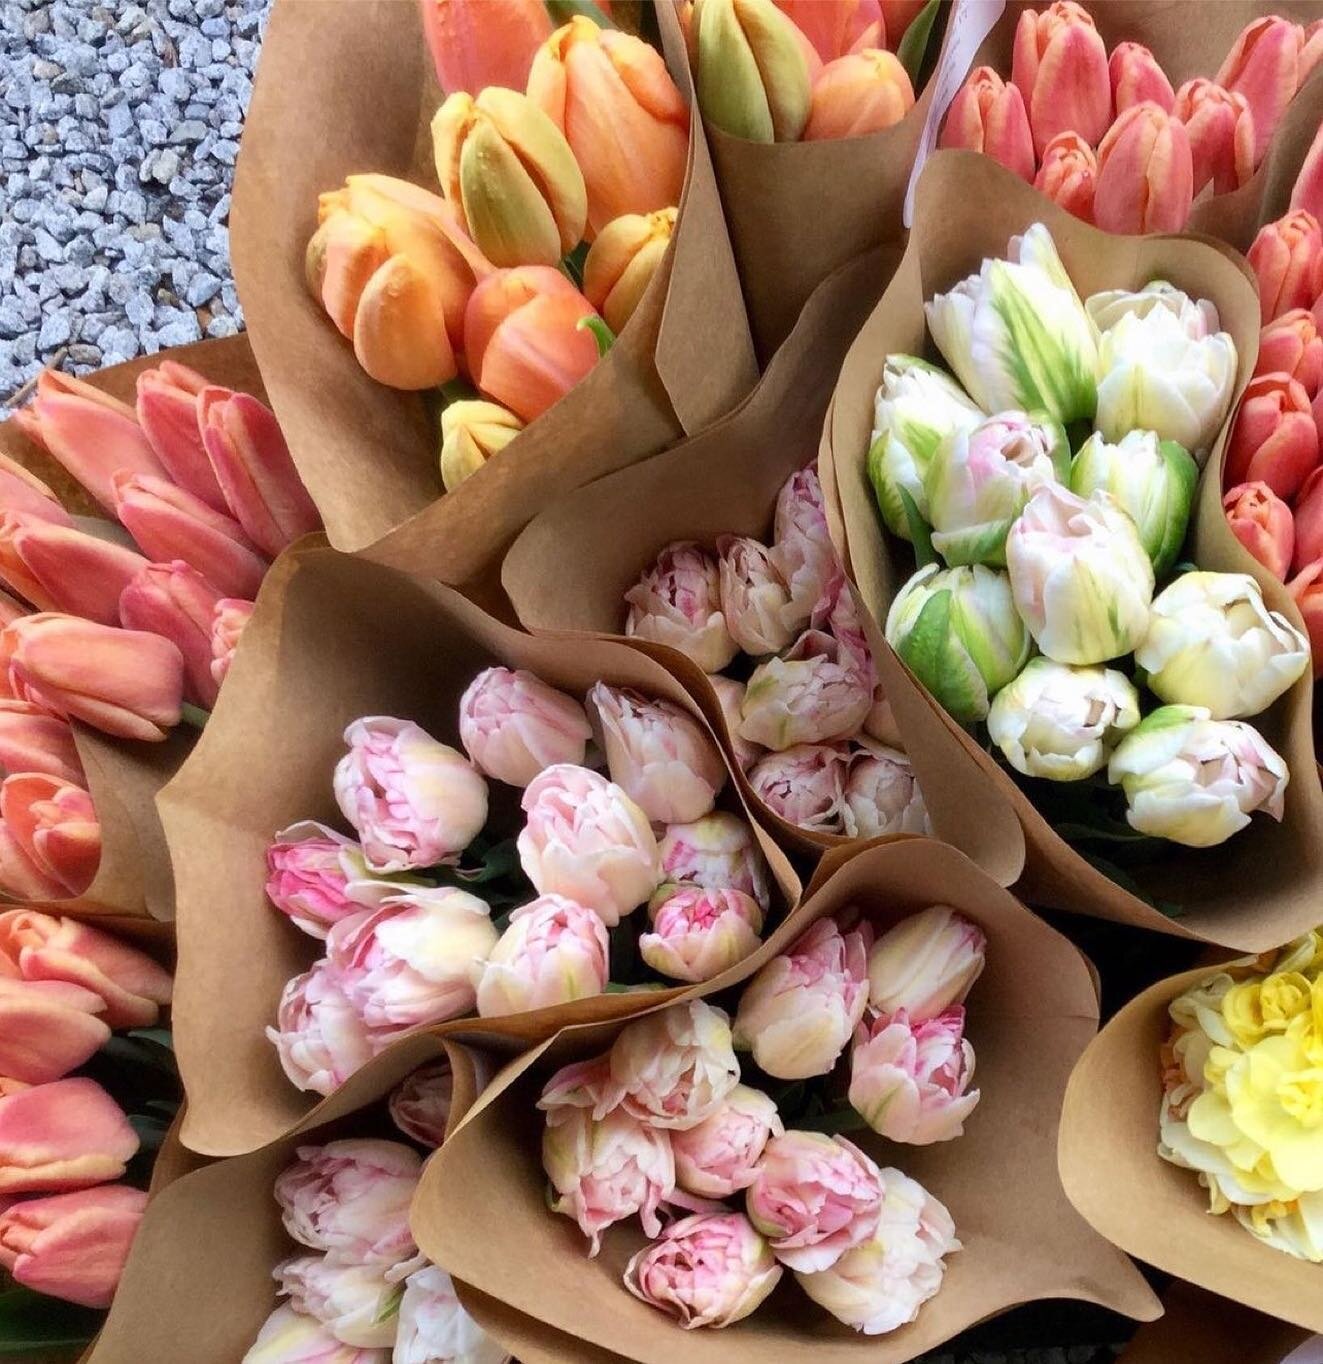 We are so excited to be teaming up with @vontrappflowers 🌷 

This CSA makes a great gift..in our honest opinion!

Repost from @vontrappflowers
&bull;
I&rsquo;m excited to announce that our 2022 Winter Tulip Bouquet CSA Subscriptions - ARE NOW AVAILA